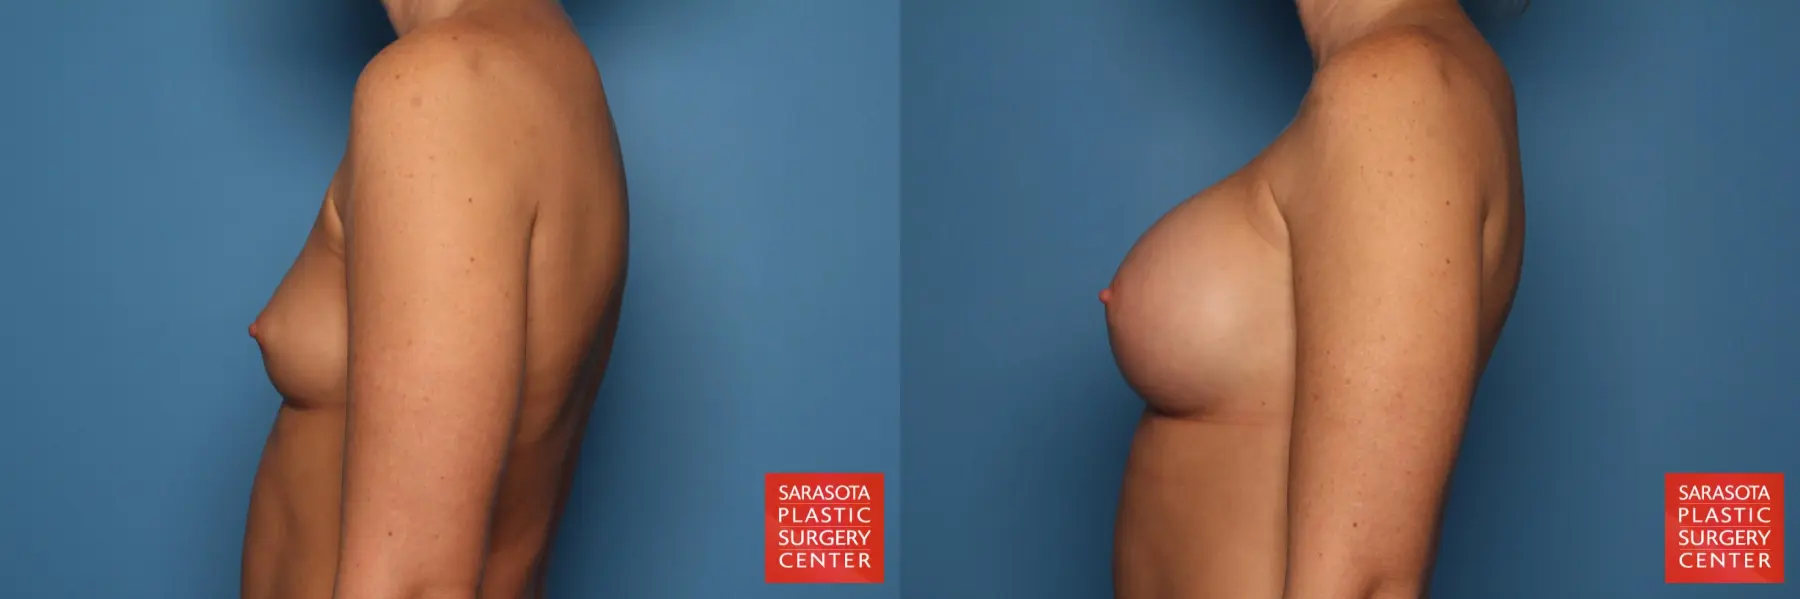 Breast Augmentation: Patient 3 - Before and After 3